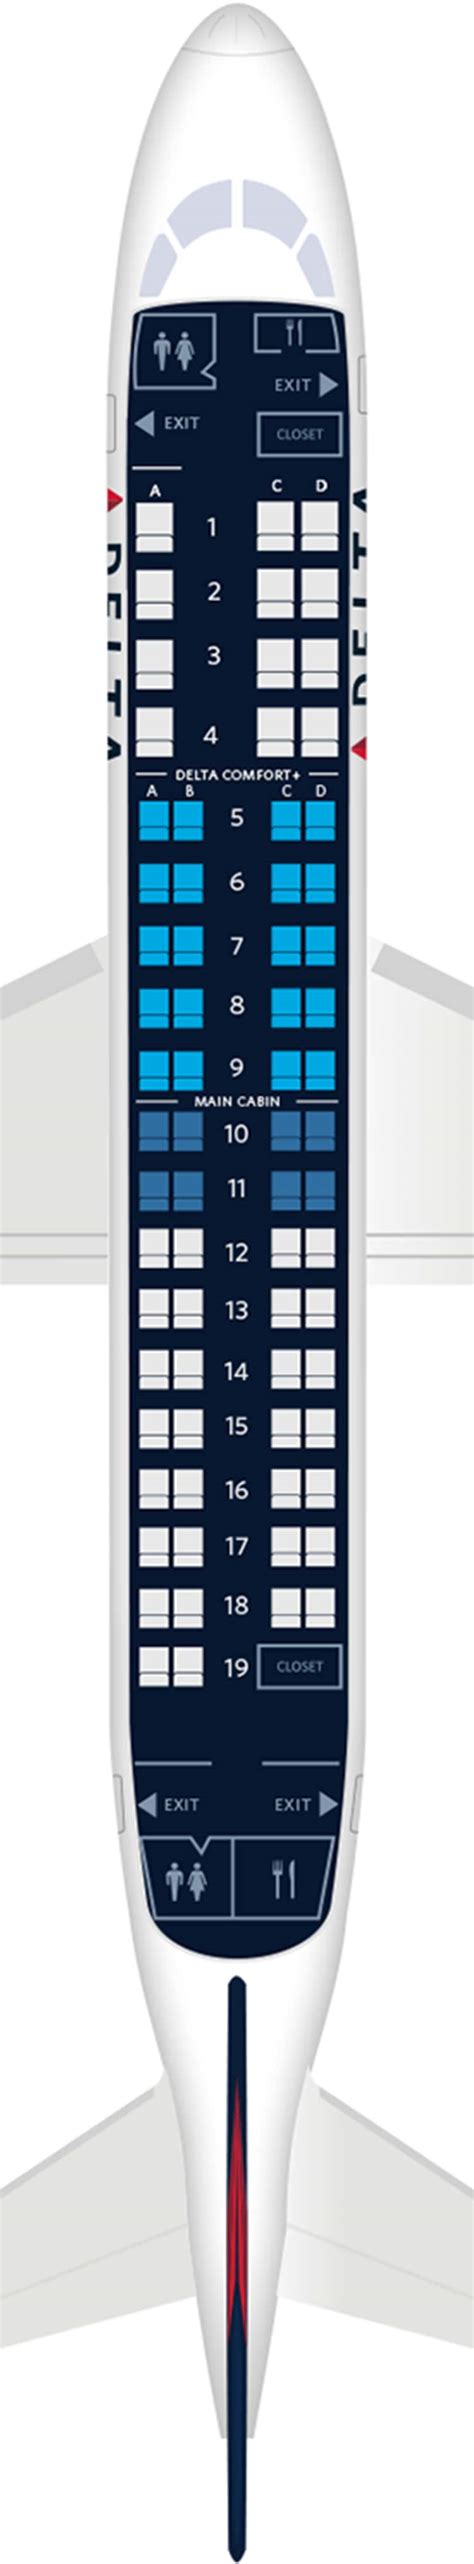 View Embraer EMB 175 seating and specifications on United aircraft using this United Airlines seating chart. Currently in Argentina | English version, enter to change. Contact Us Search united.com ... Embraer EMB 175. Version 1 (12/32/26) Version 2 (12/16/48) Seat map (12/32/26). 